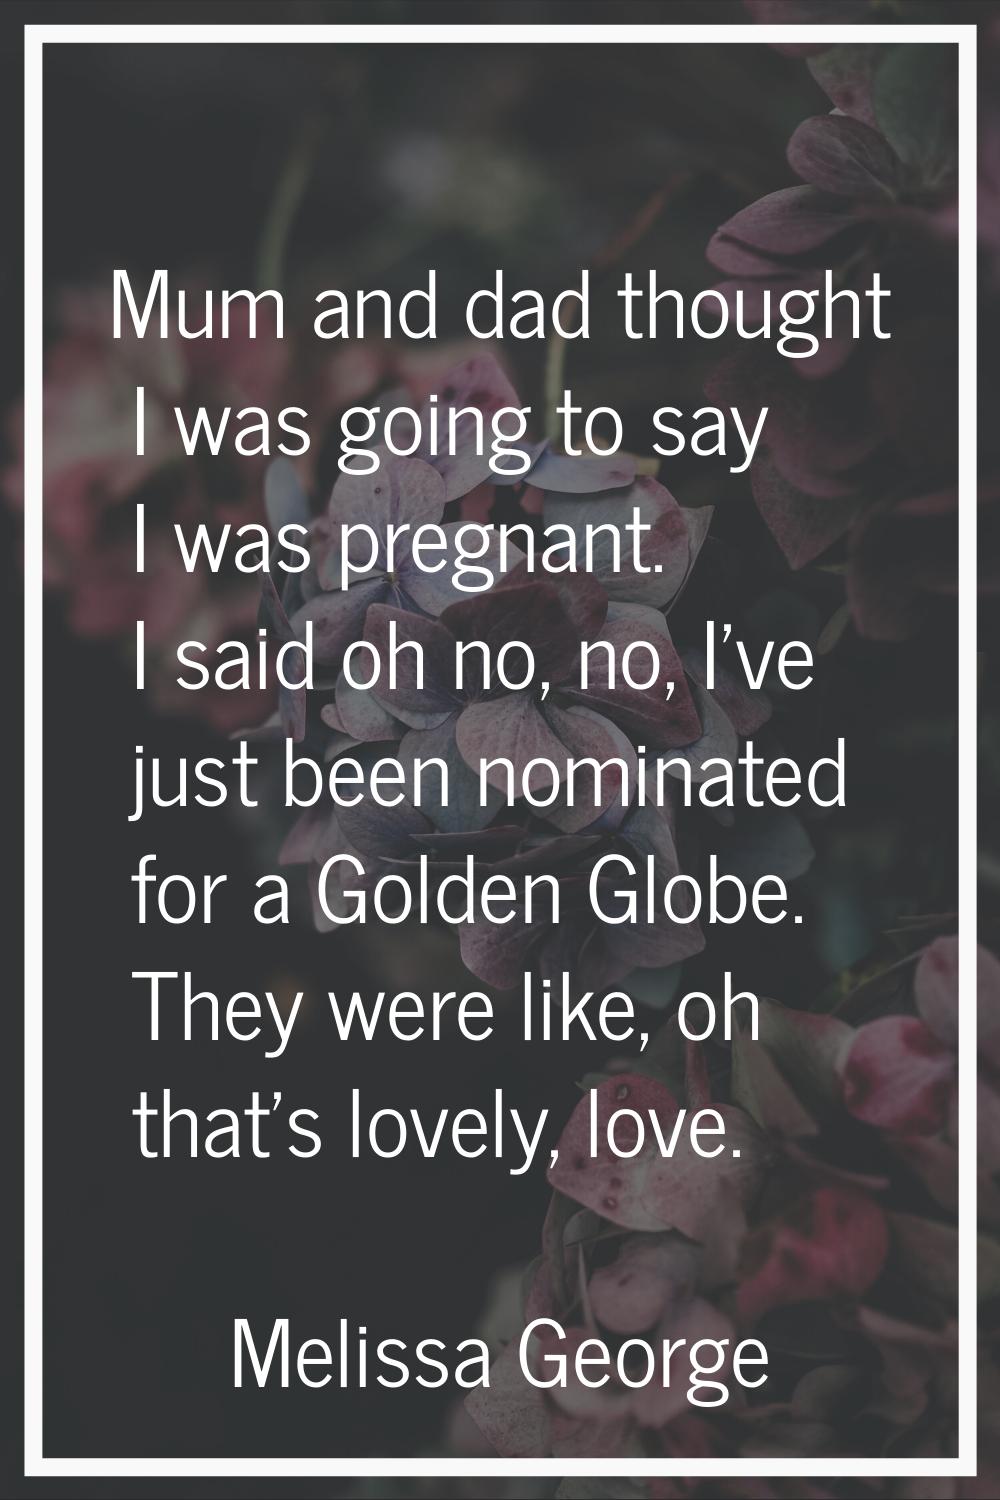 Mum and dad thought I was going to say I was pregnant. I said oh no, no, I've just been nominated f